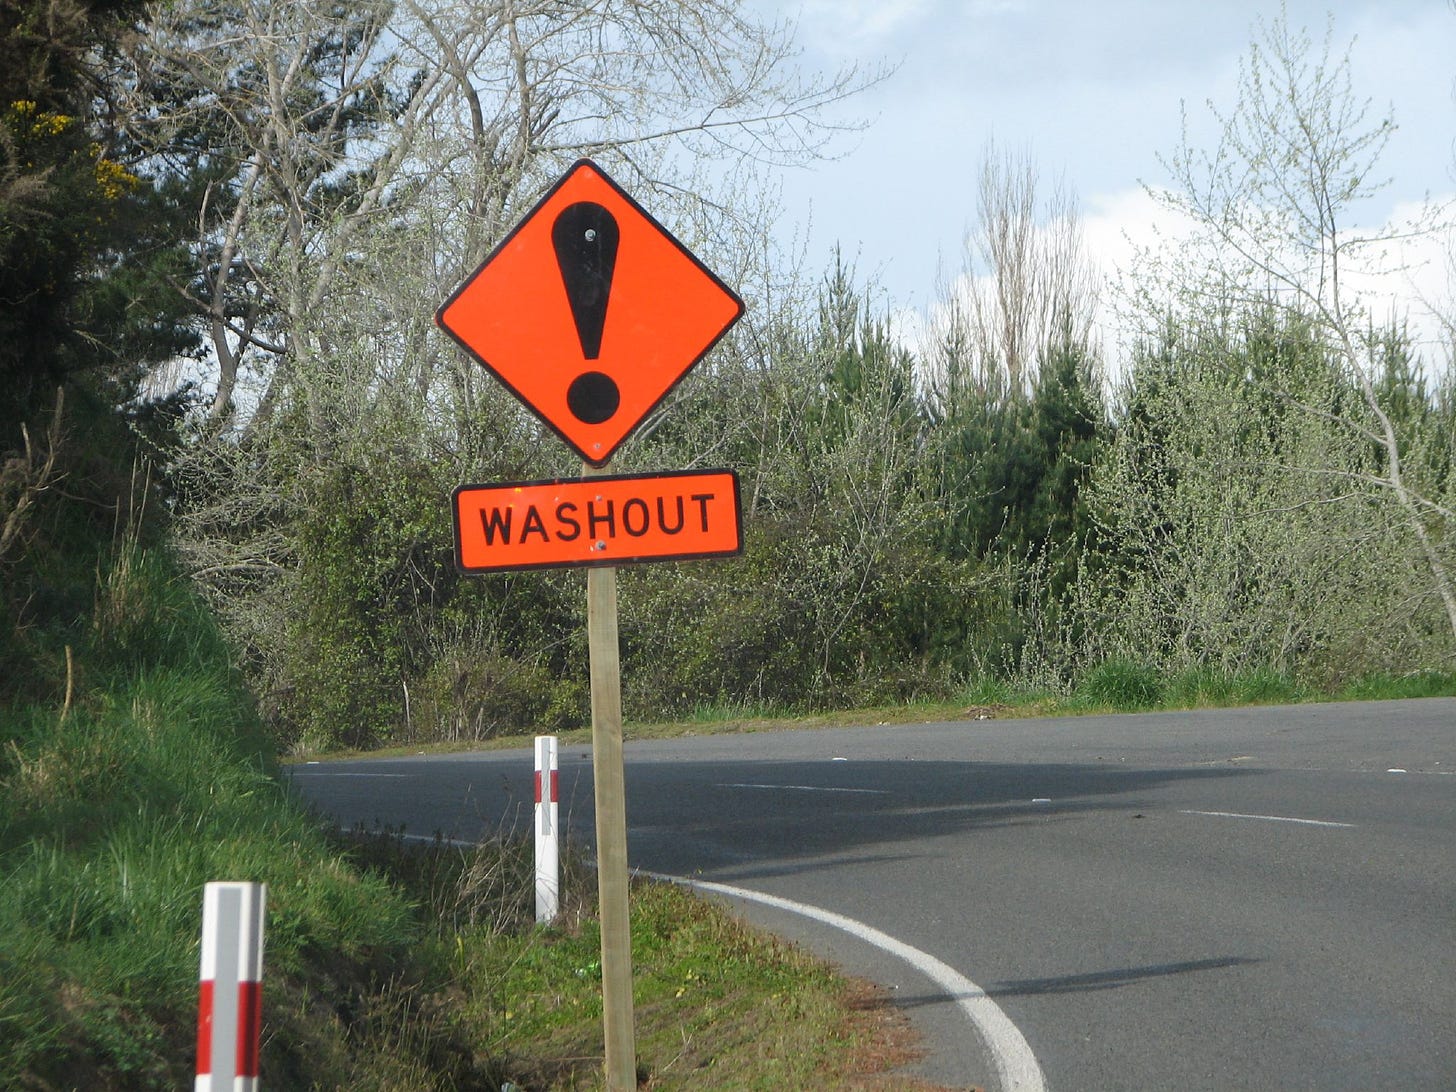 Curving hillside road with a bright red sign showing an exclamation mark and the word WASHOUT.